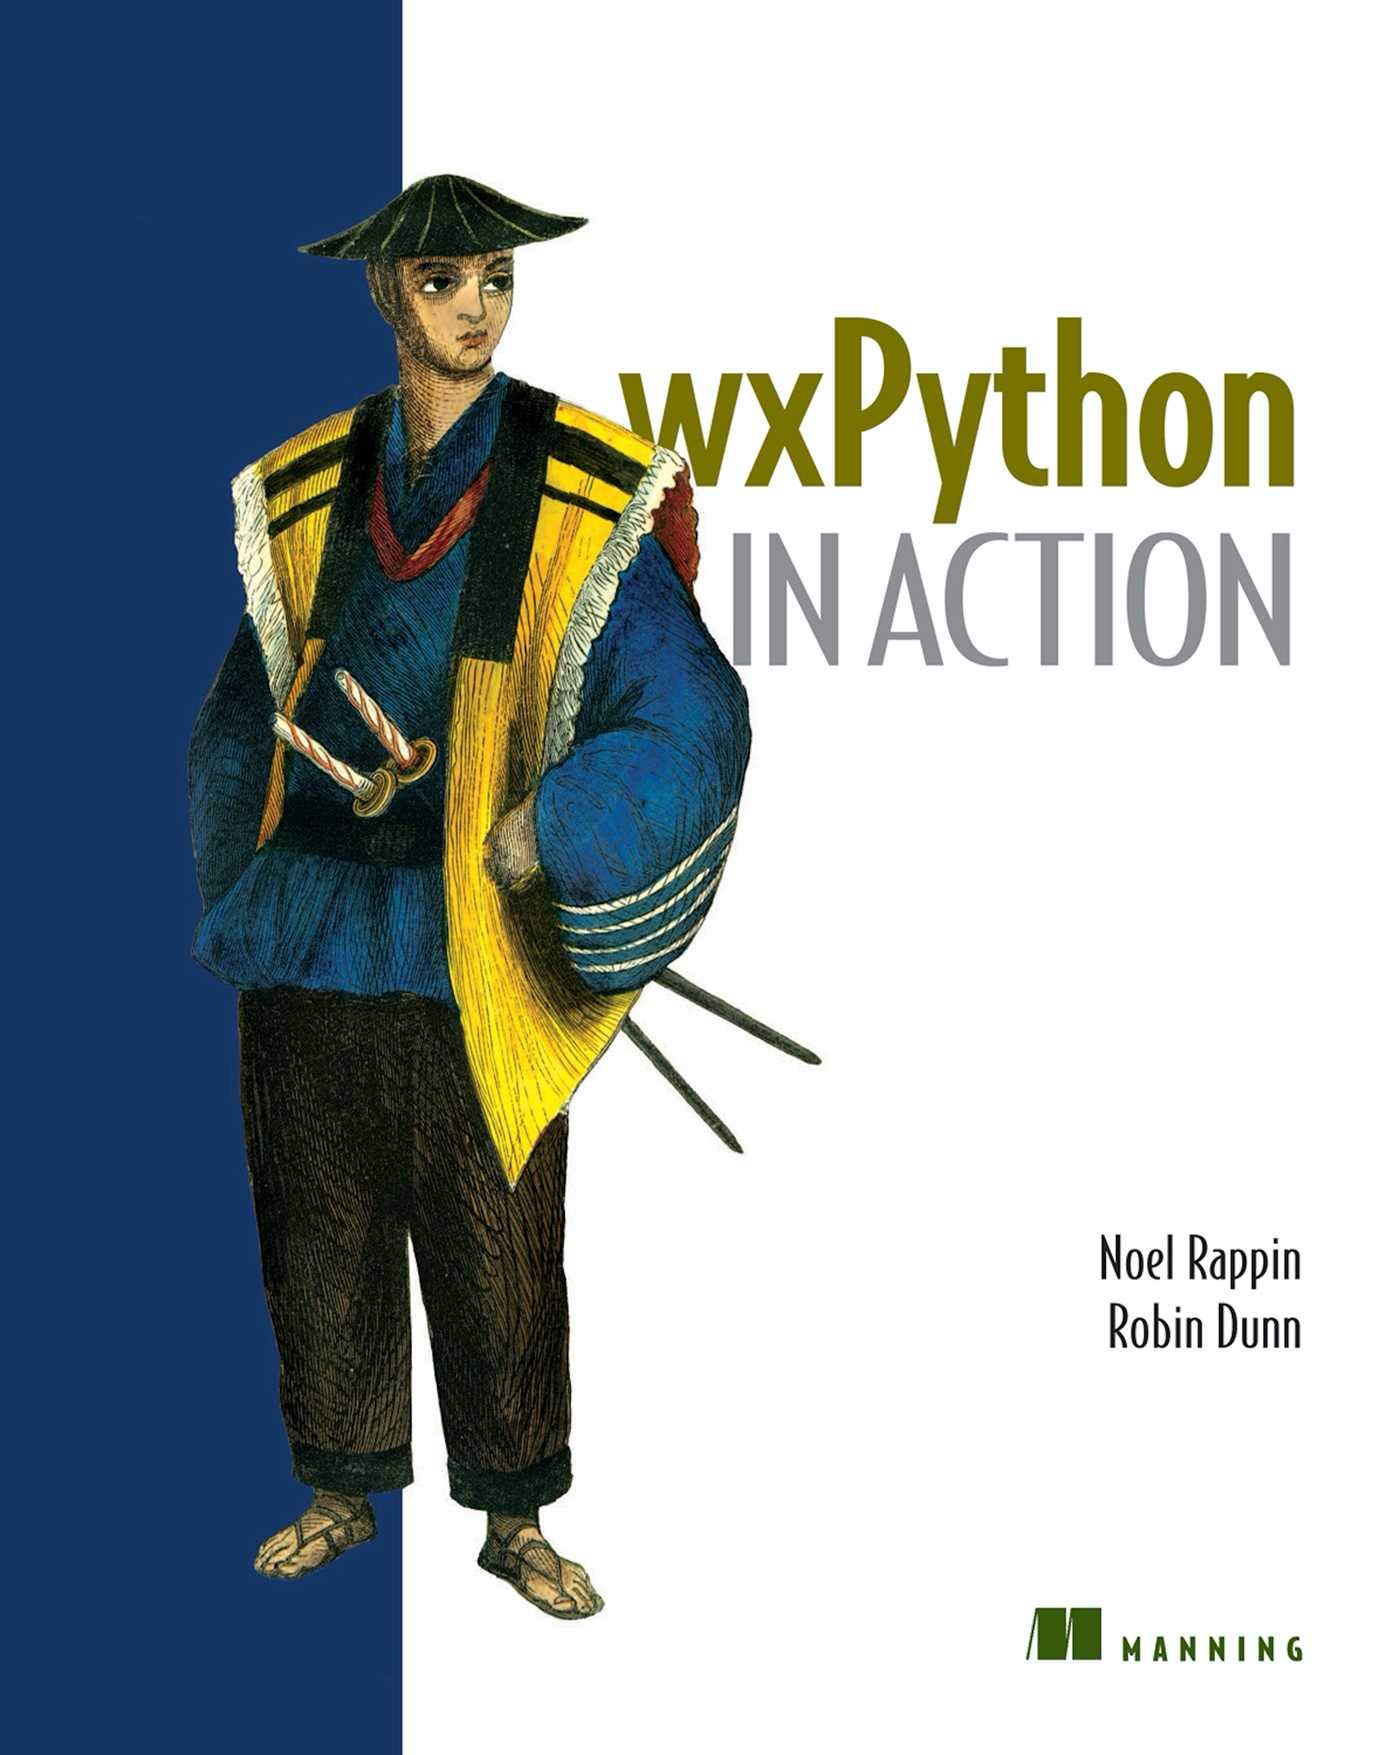 Wxpython in Action by Noel Rappin, Robin Dunn